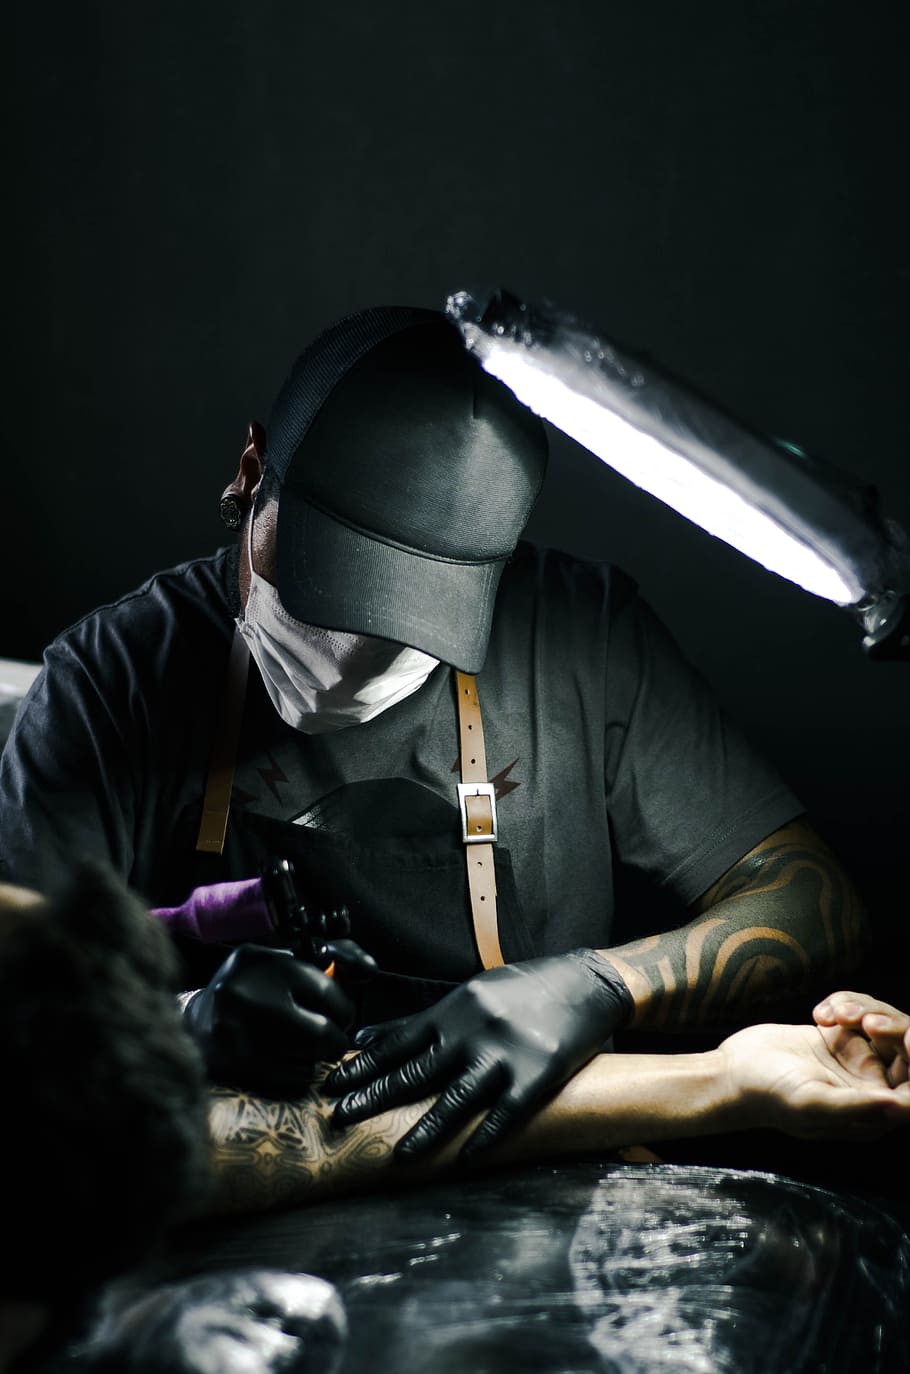 HD wallpaper: Tattoo artist in black gloves drawing a tattoo on a person's  arm | Wallpaper Flare